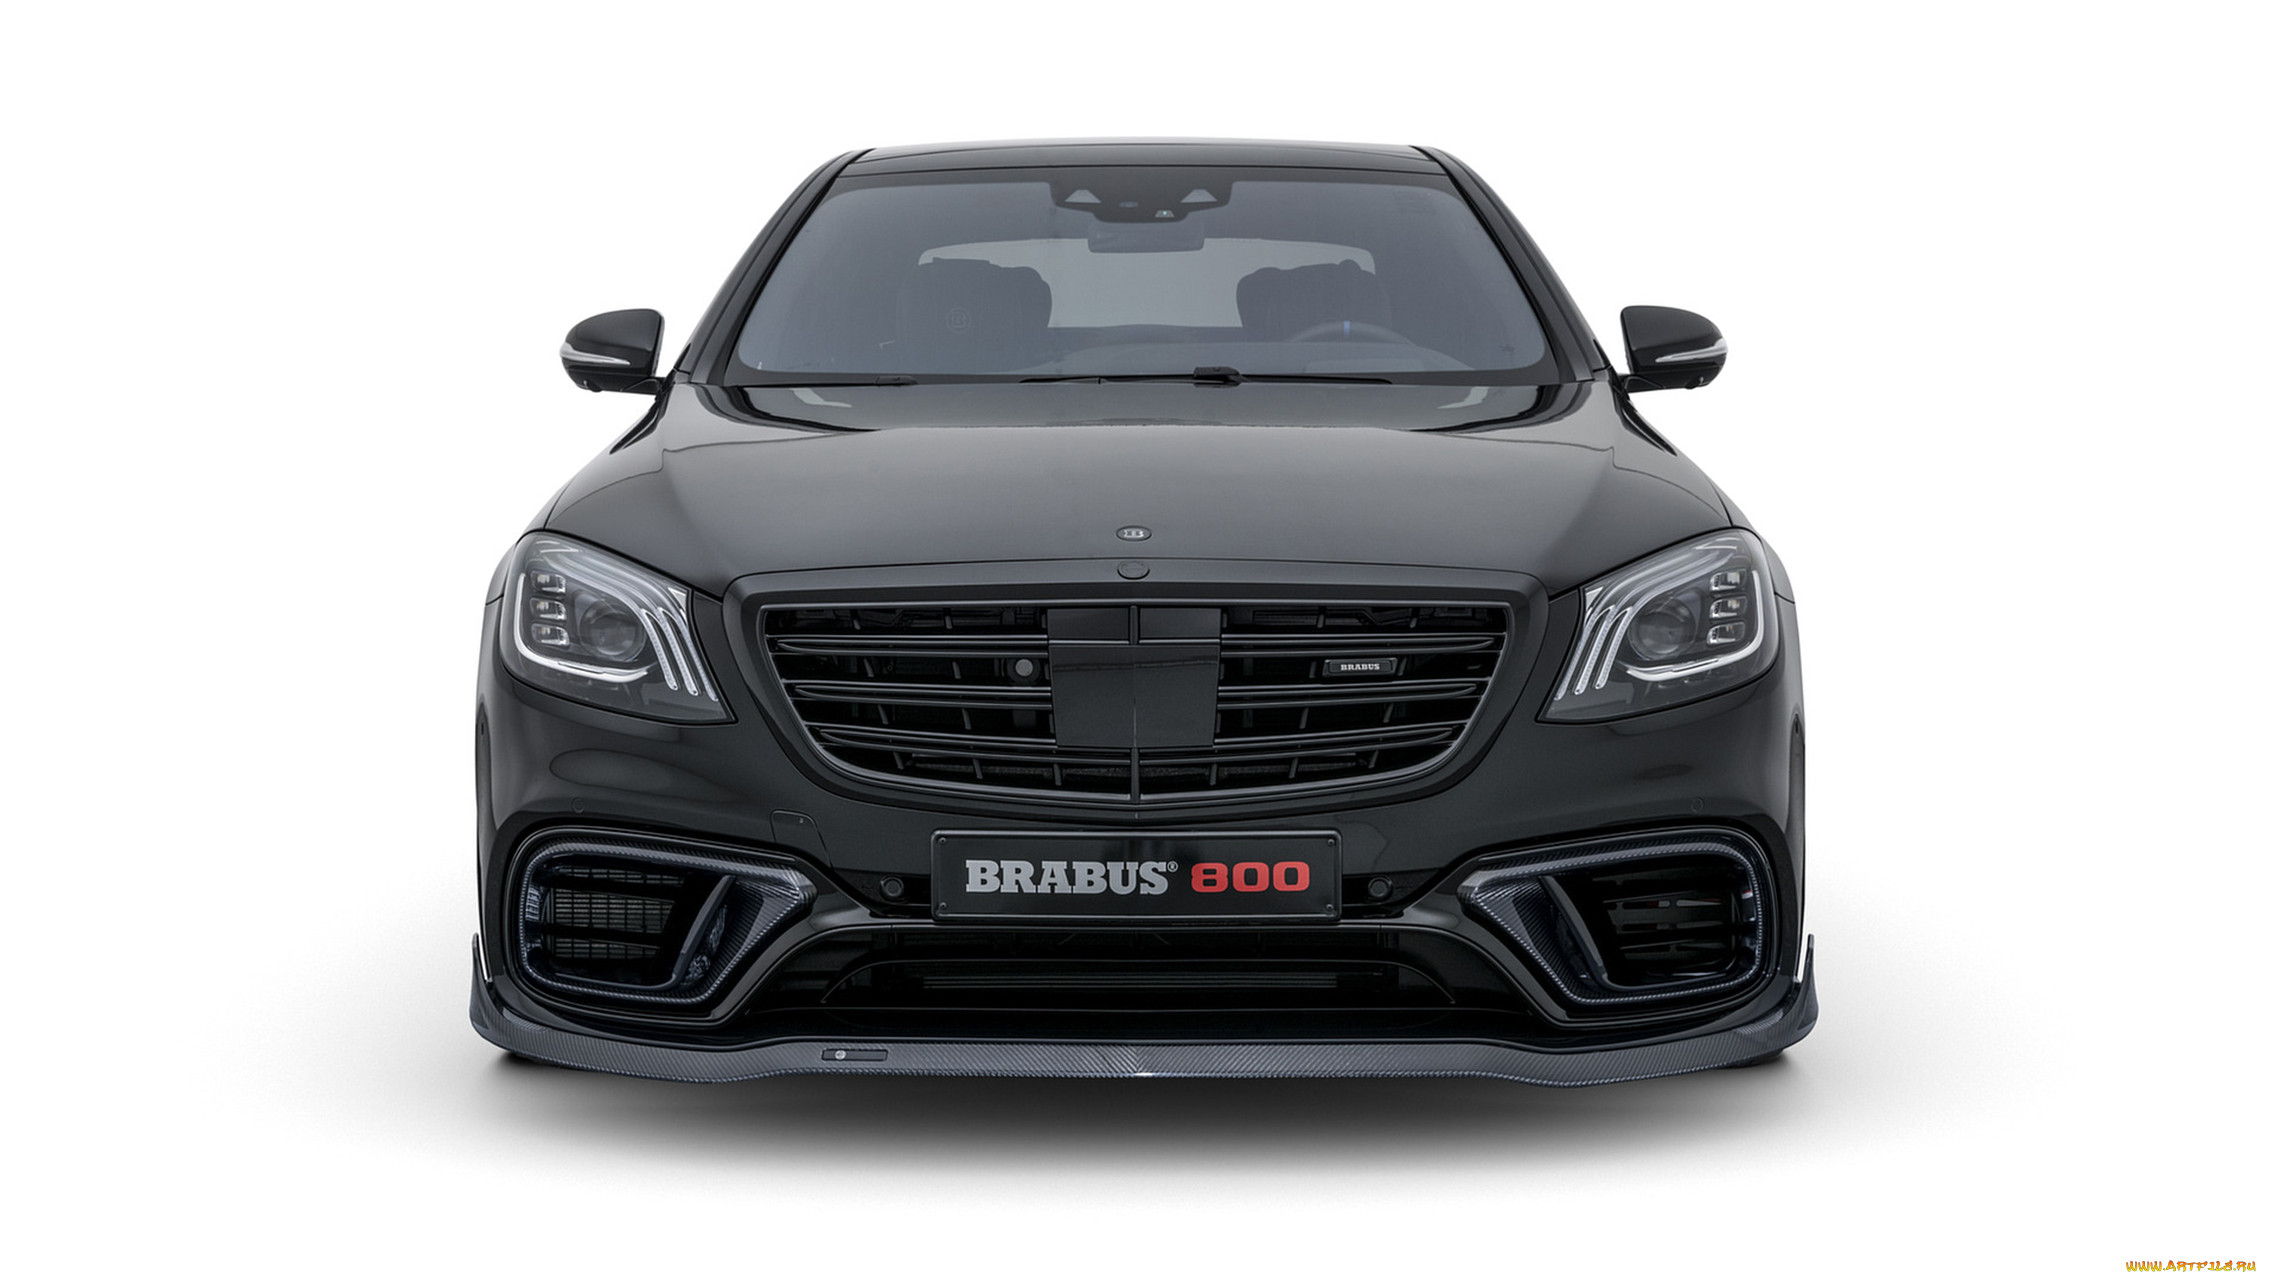 brabus 800 based on mercedes-benz amg s-63 4matic  2018, , brabus, 800, 2018, 4matic, amg, s-63, mercedes-benz, based